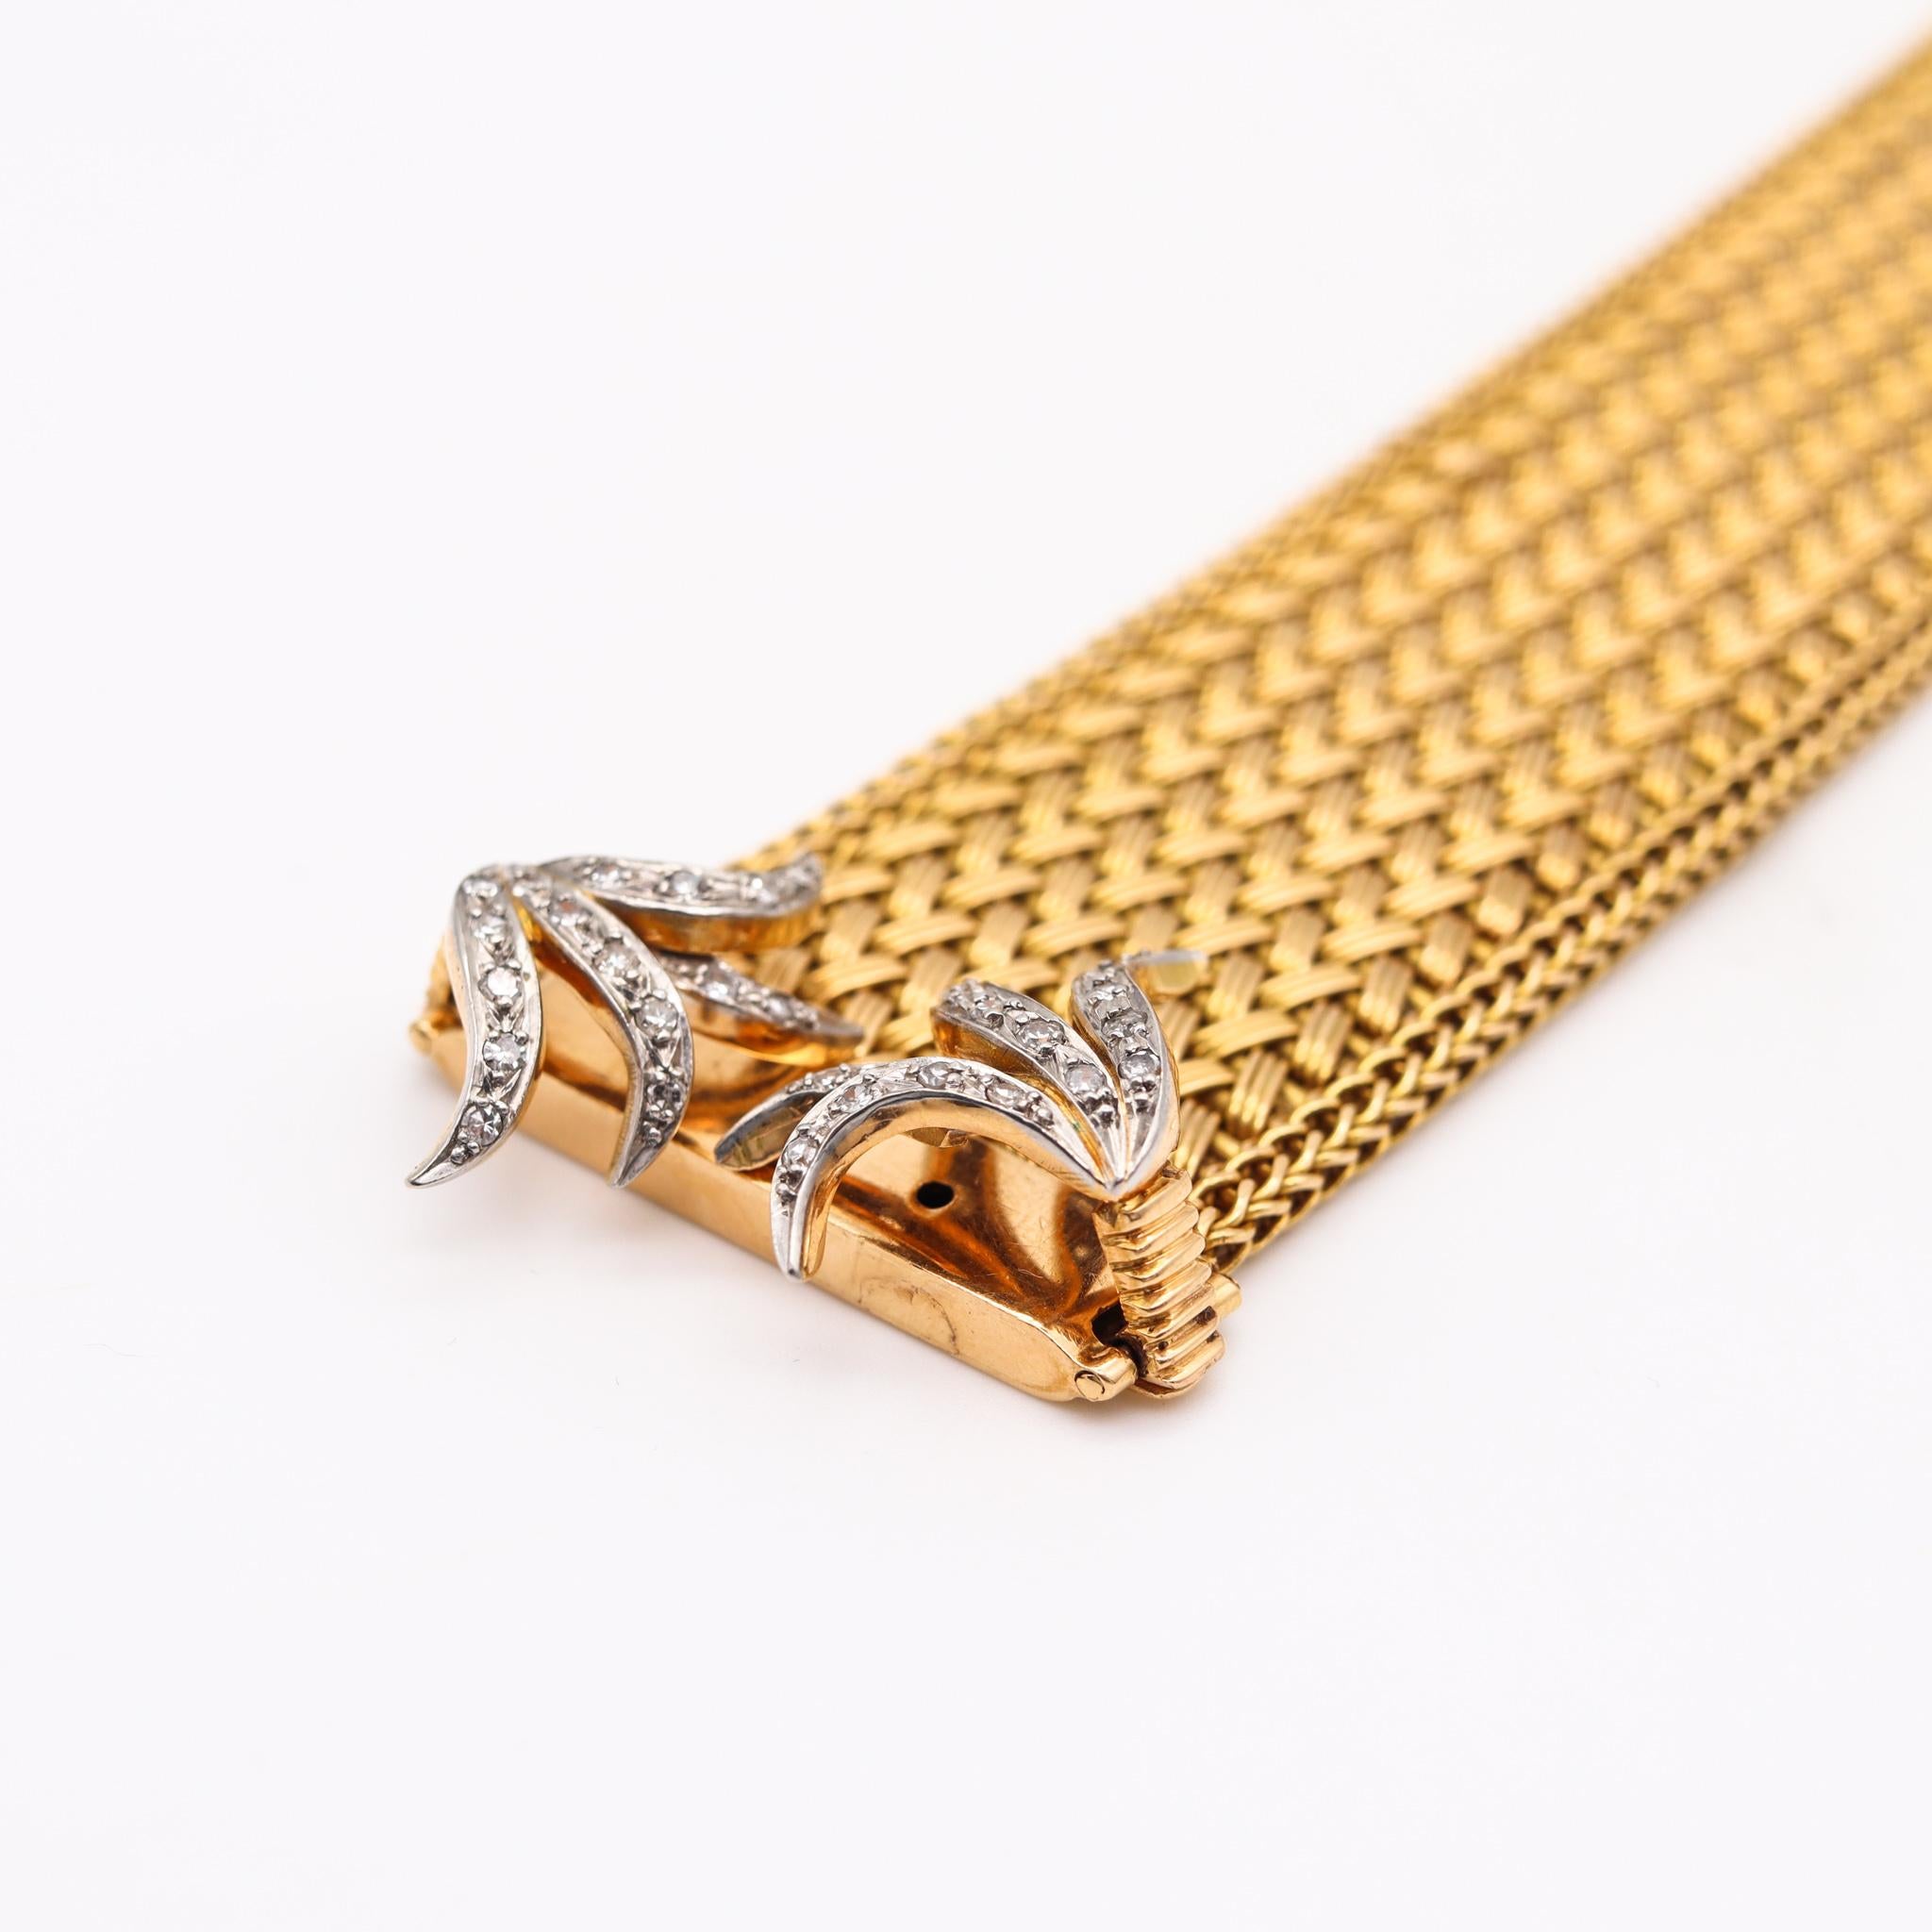 Women's French 1950 Mid-Century Mesh Buckle Bracelet in 18Kt Gold with Diamonds Accents